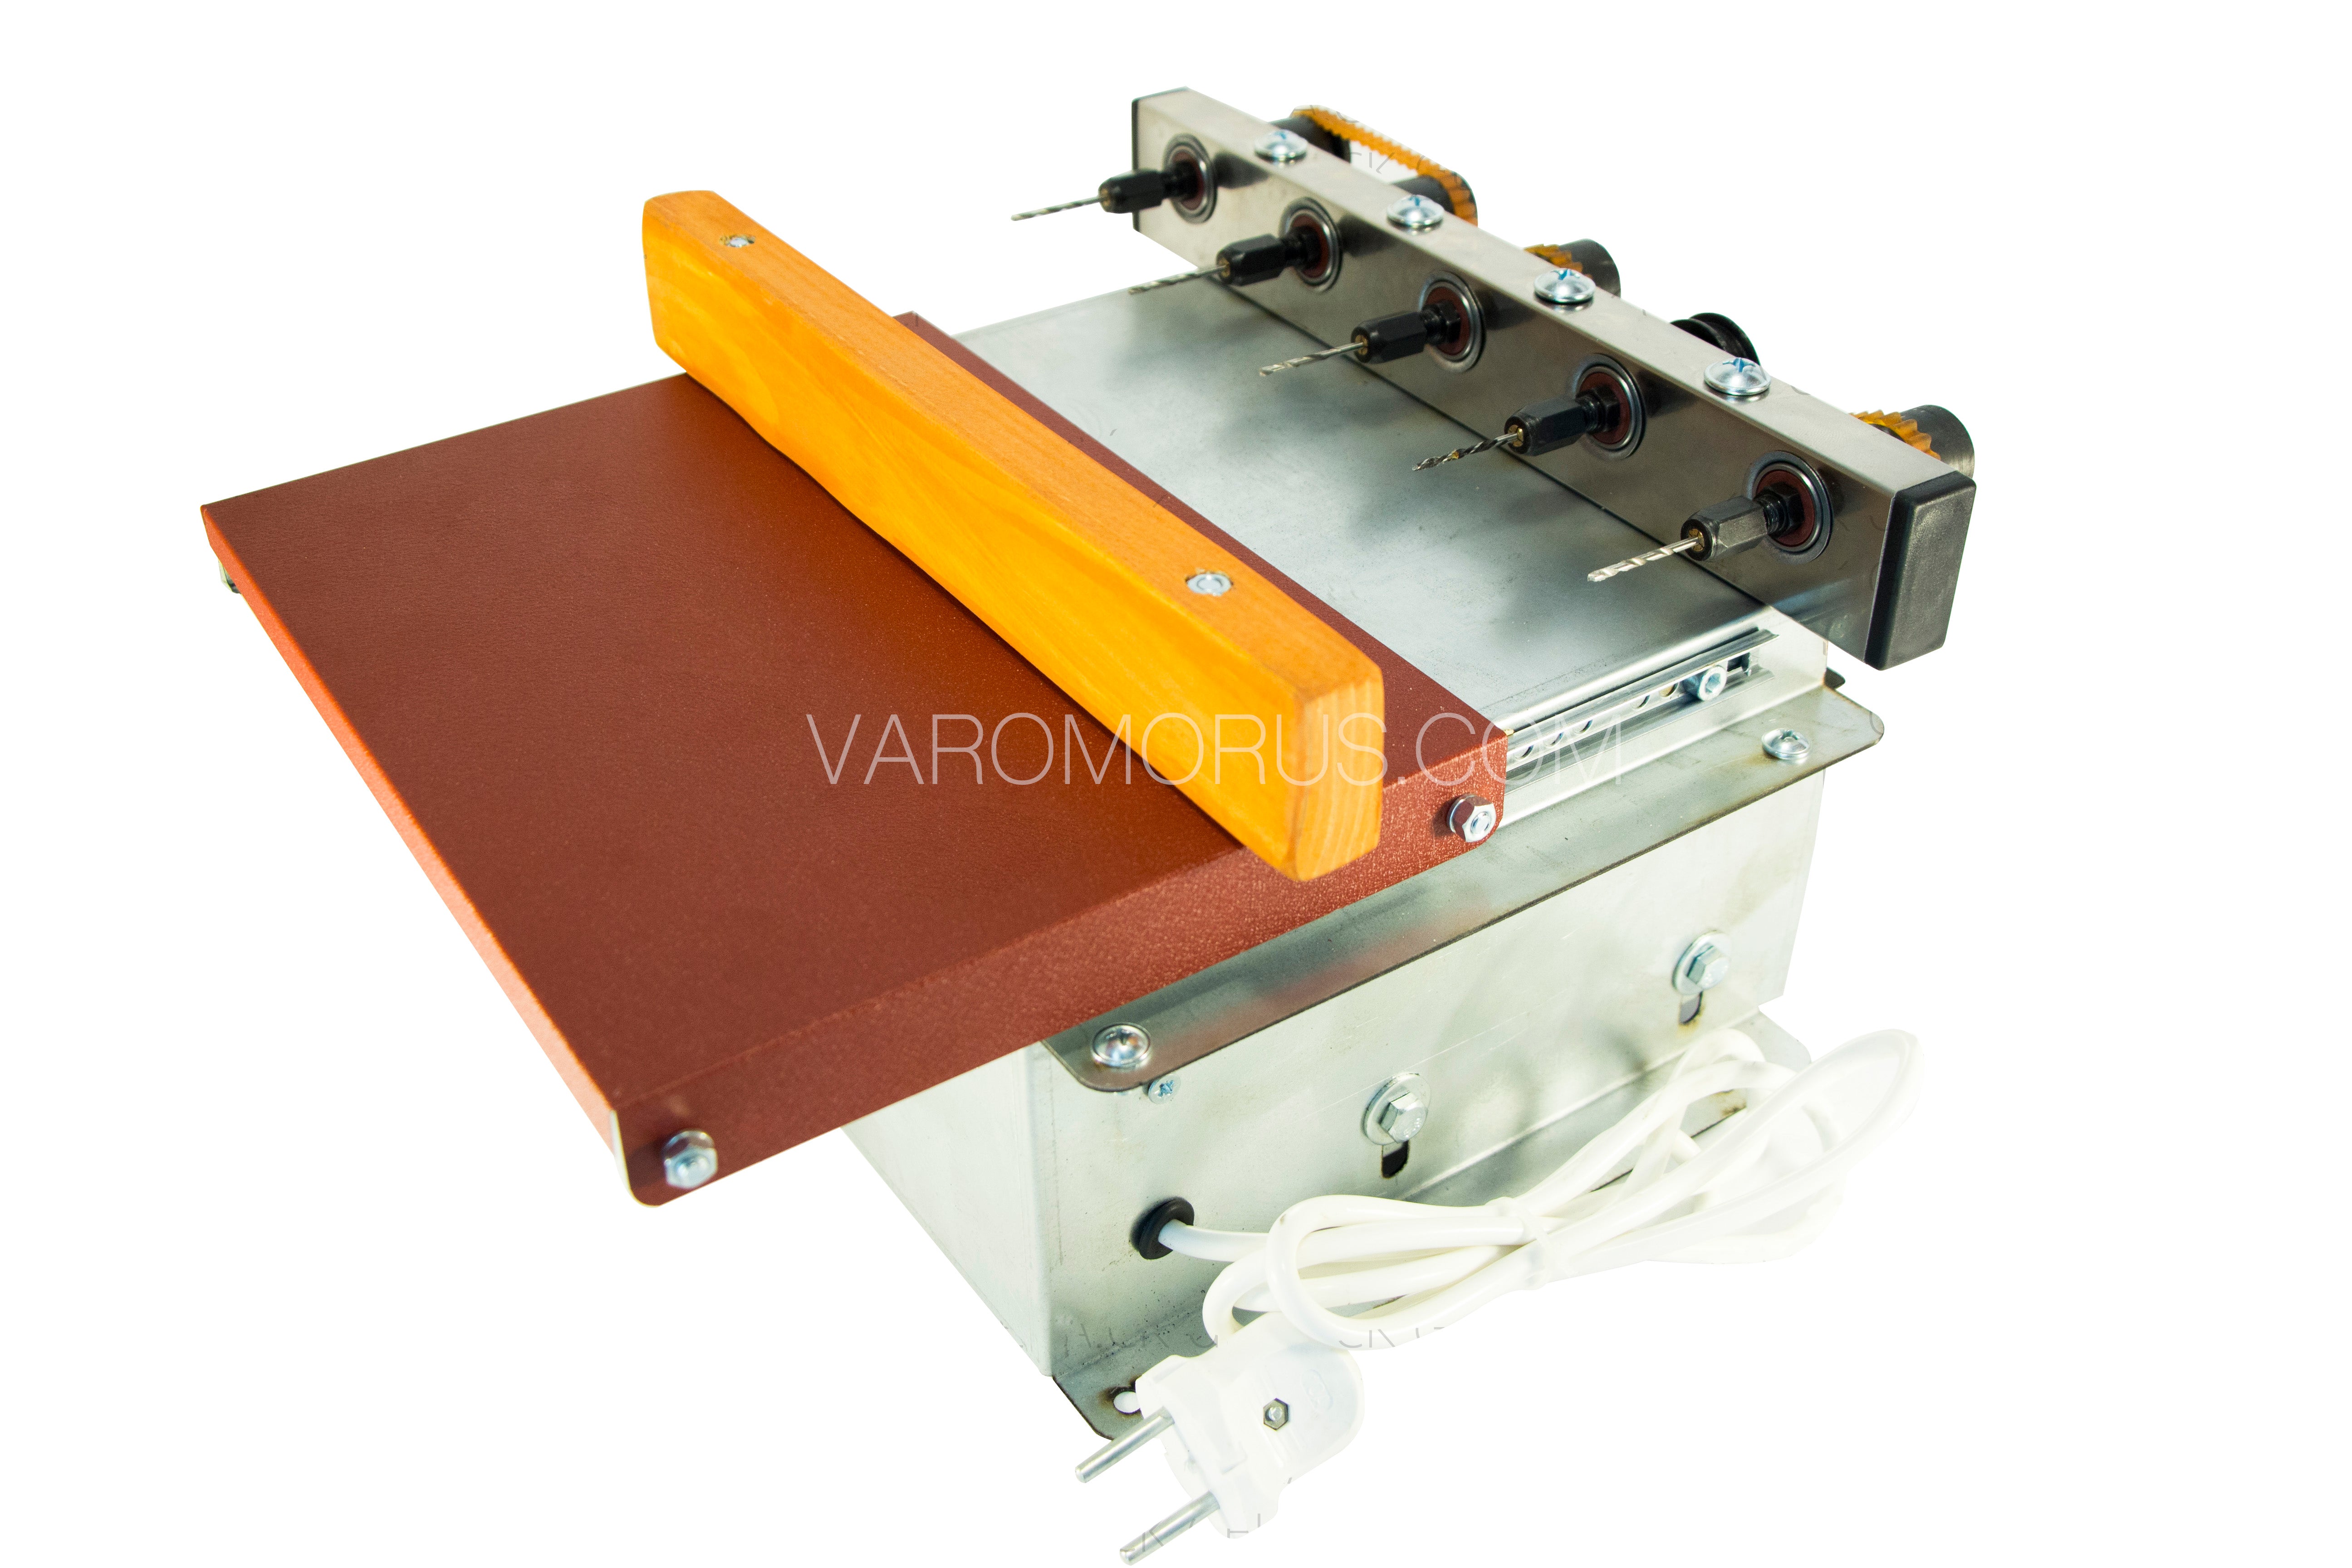 FRAMES MAKER DRILLING MACHINE 5 HOLES WITH MOTOR